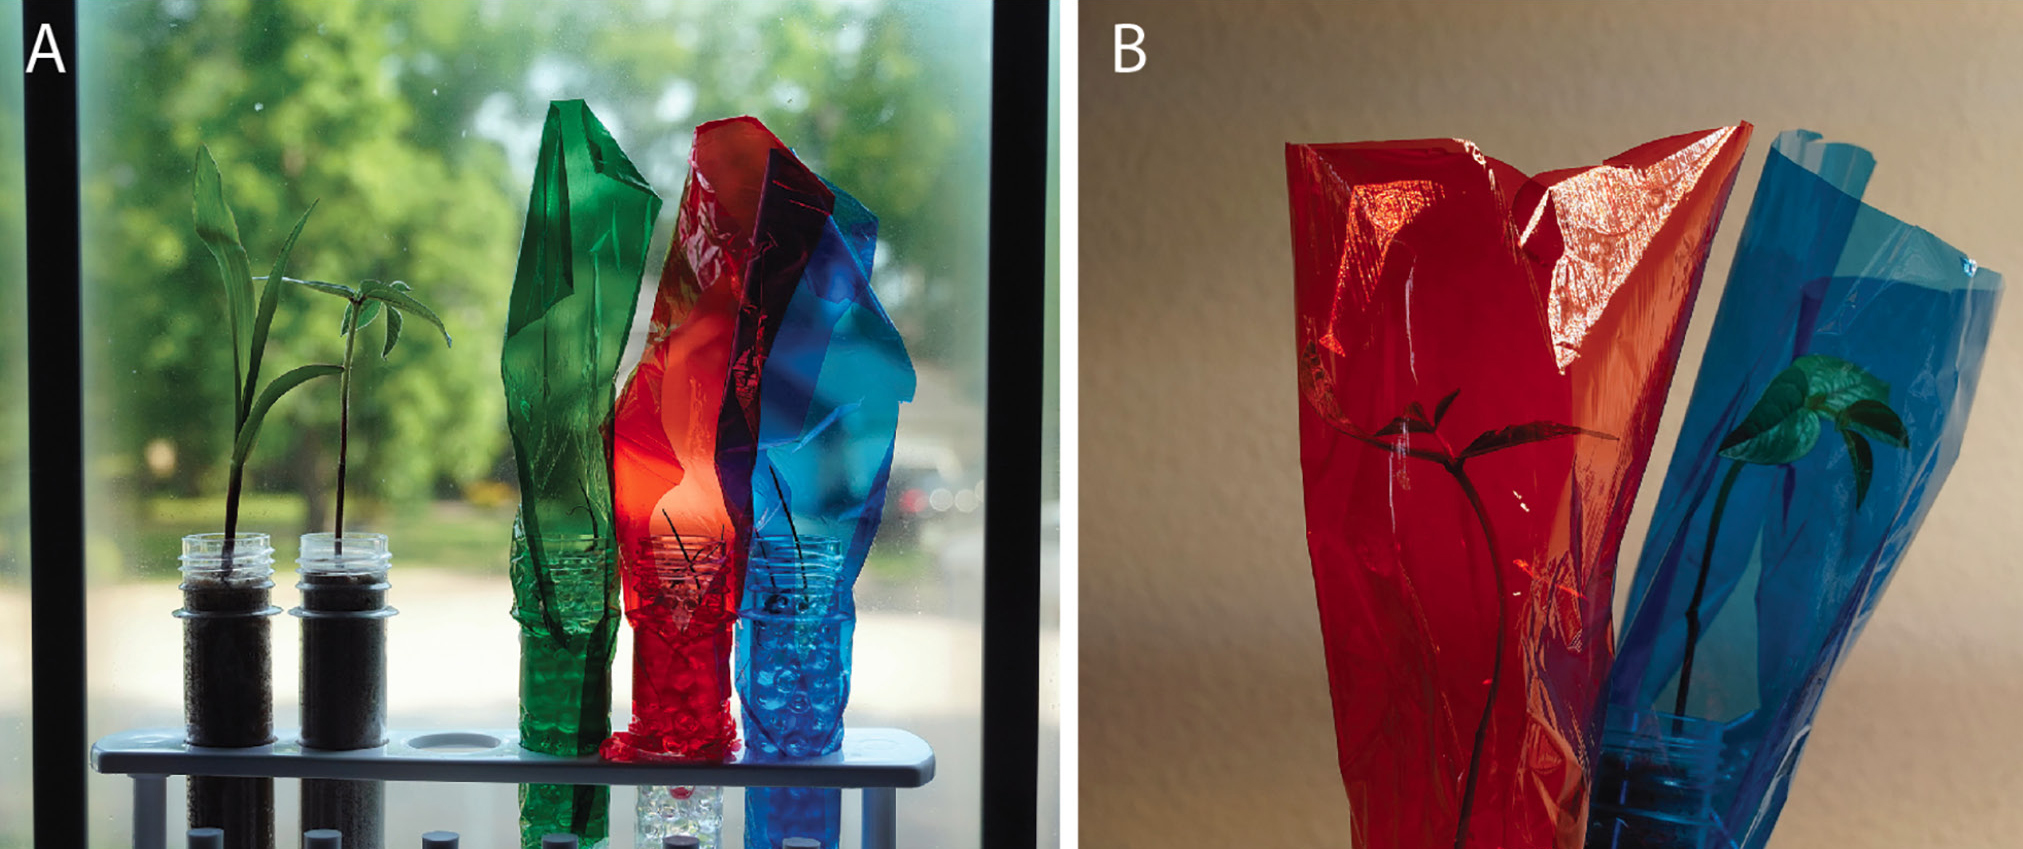 Figure 3. Two growth experiments under different lighting conditions: (A) an experiment looking at the effect of light on growth and behavior of plants, with experiment set up on a window sill; (B) two mung bean plants with an LED source to the right of the picture, showing the mung bean plant in the blue cellophane bending toward the light, while the plant in the red cellophane is insensitive to the direction of the light. These illustrations show only one plant per color treatment, but in reality, more pl